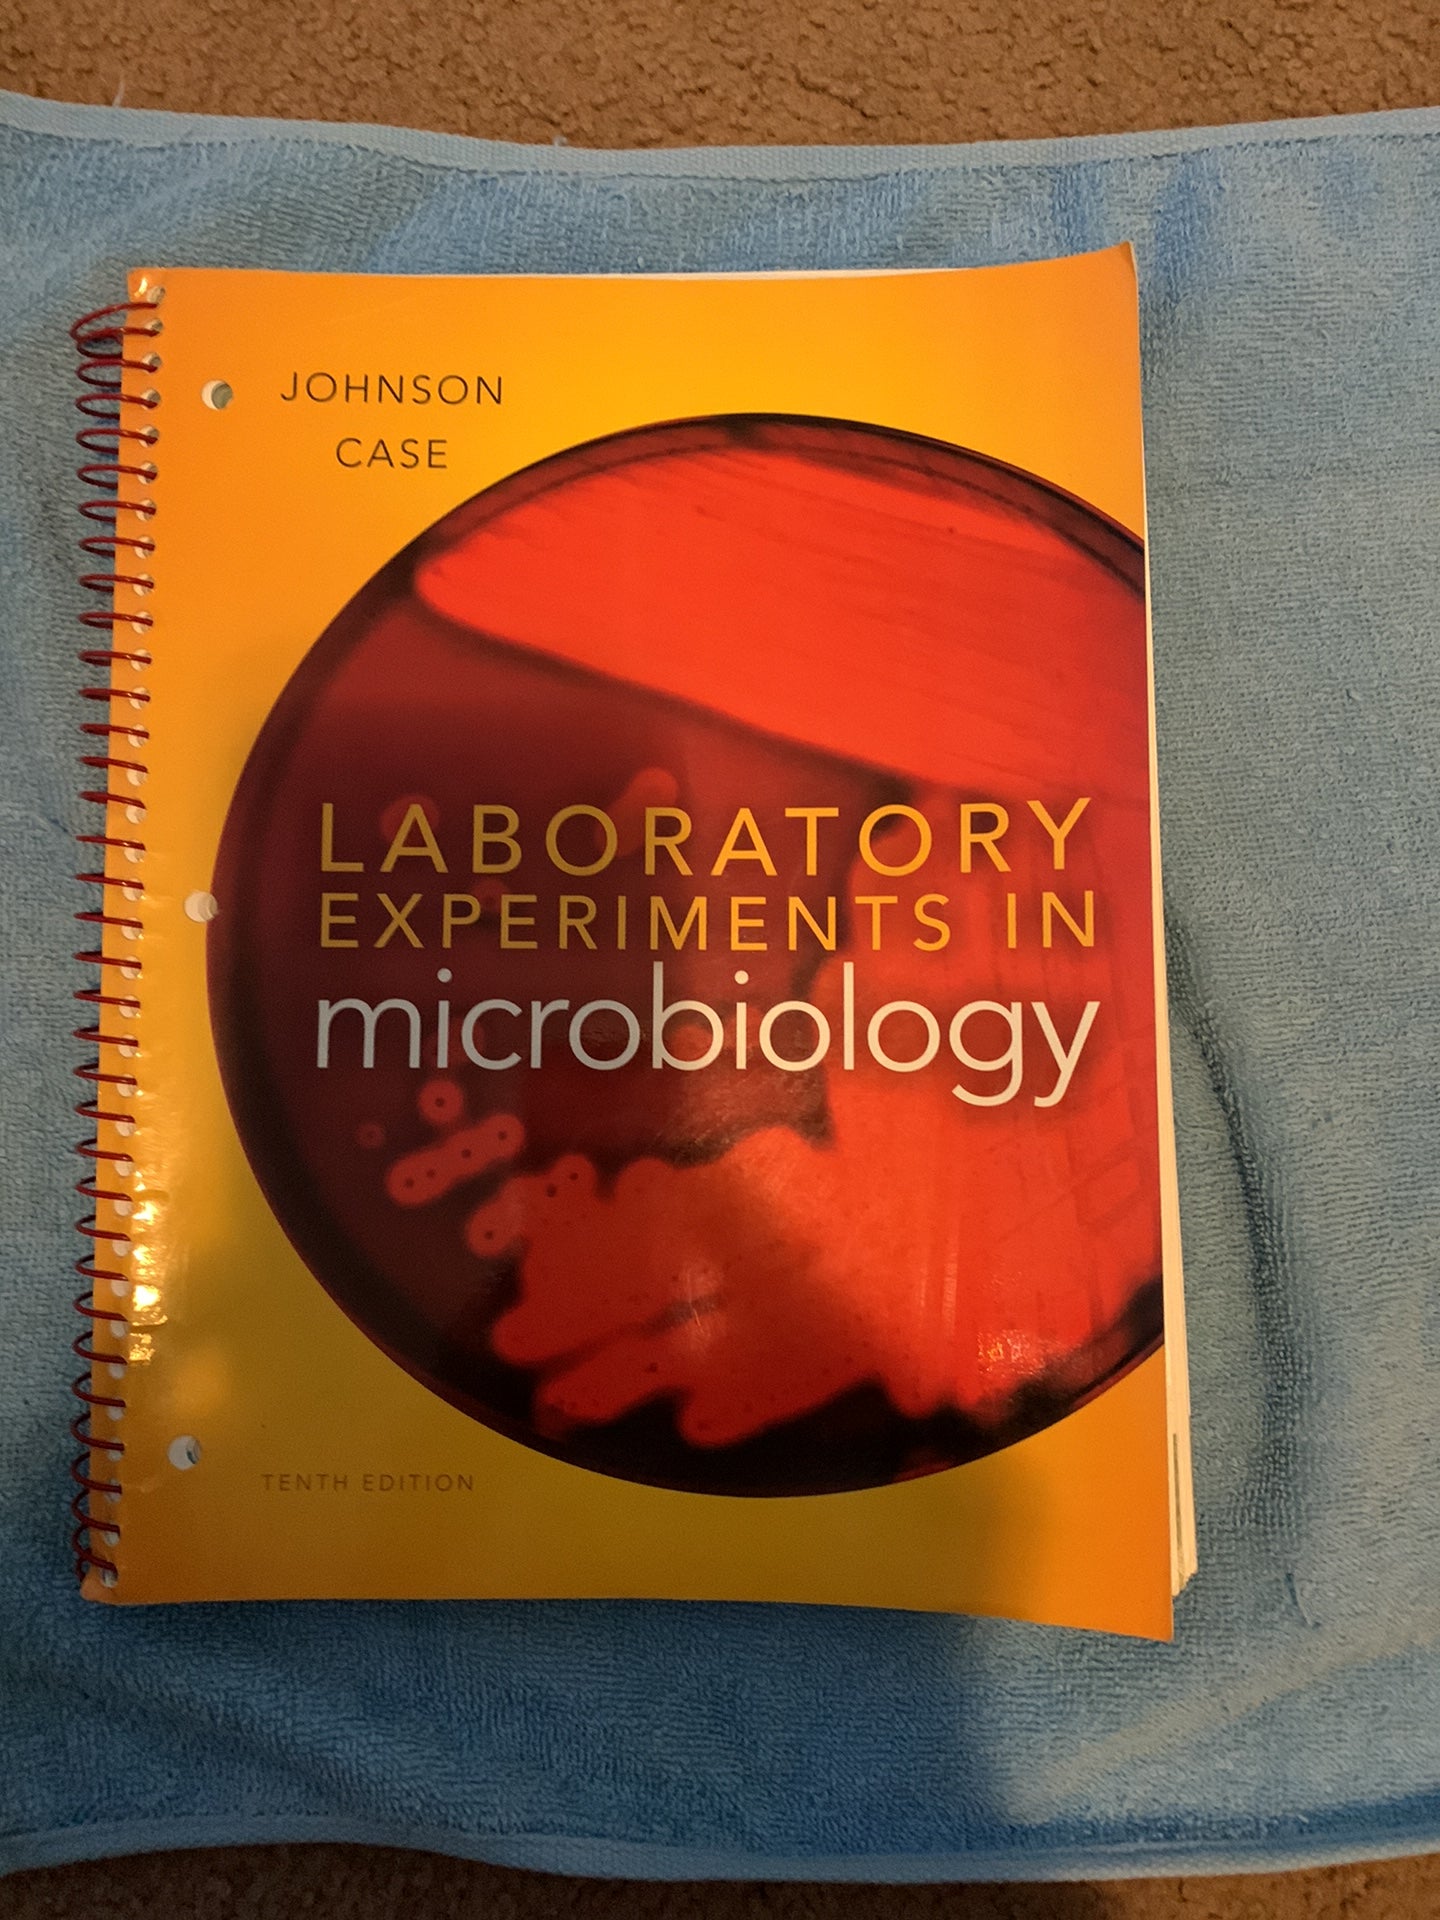 Experiments　Ted　R.　L.　Johnson;　Laboratory　Microbiology　Paperback　by　in　Case,　Christine　Pangobooks